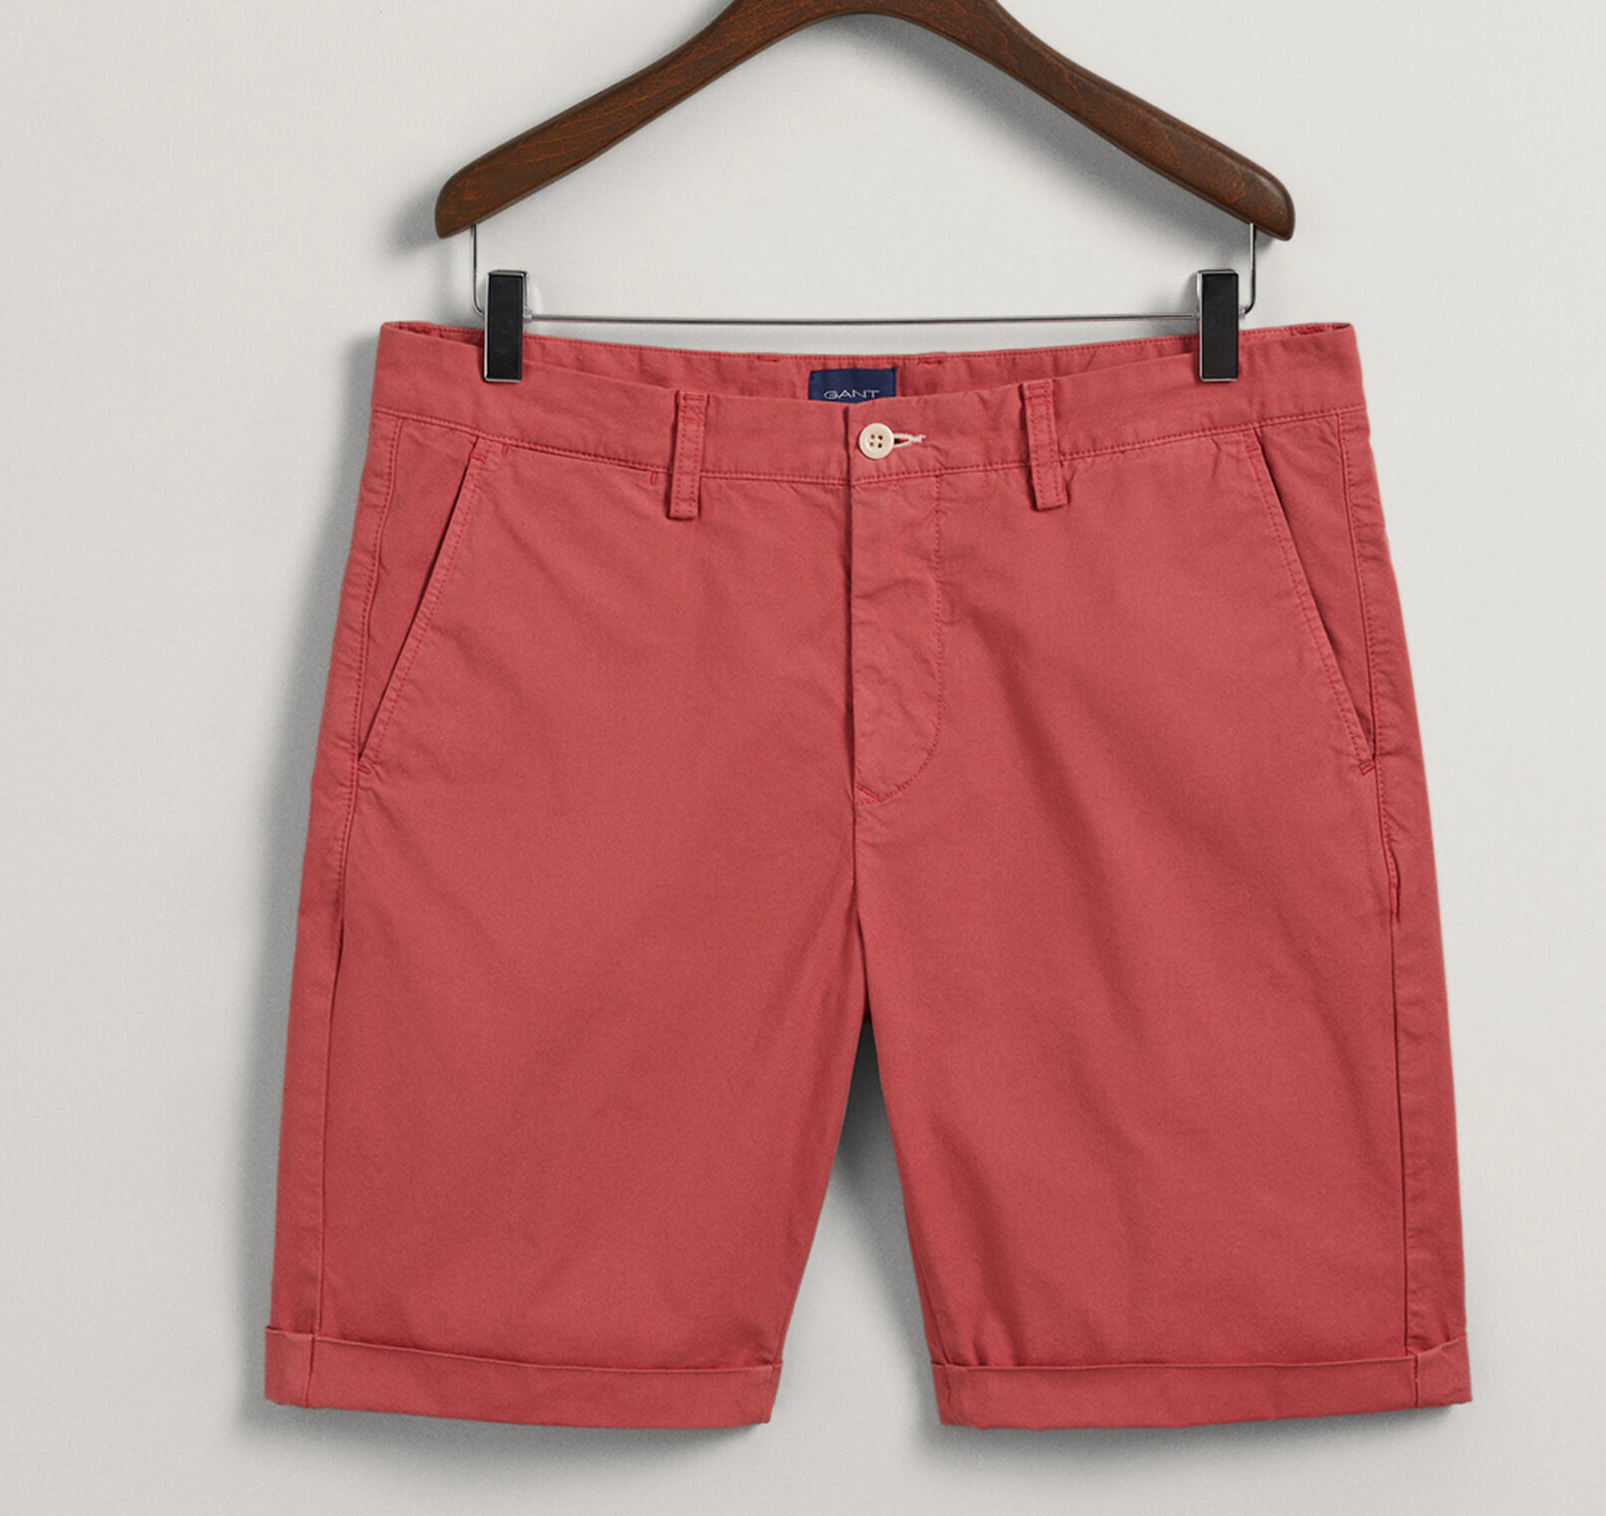 Gant "Allister" Sunfaded Chino Shorts Mineral Red